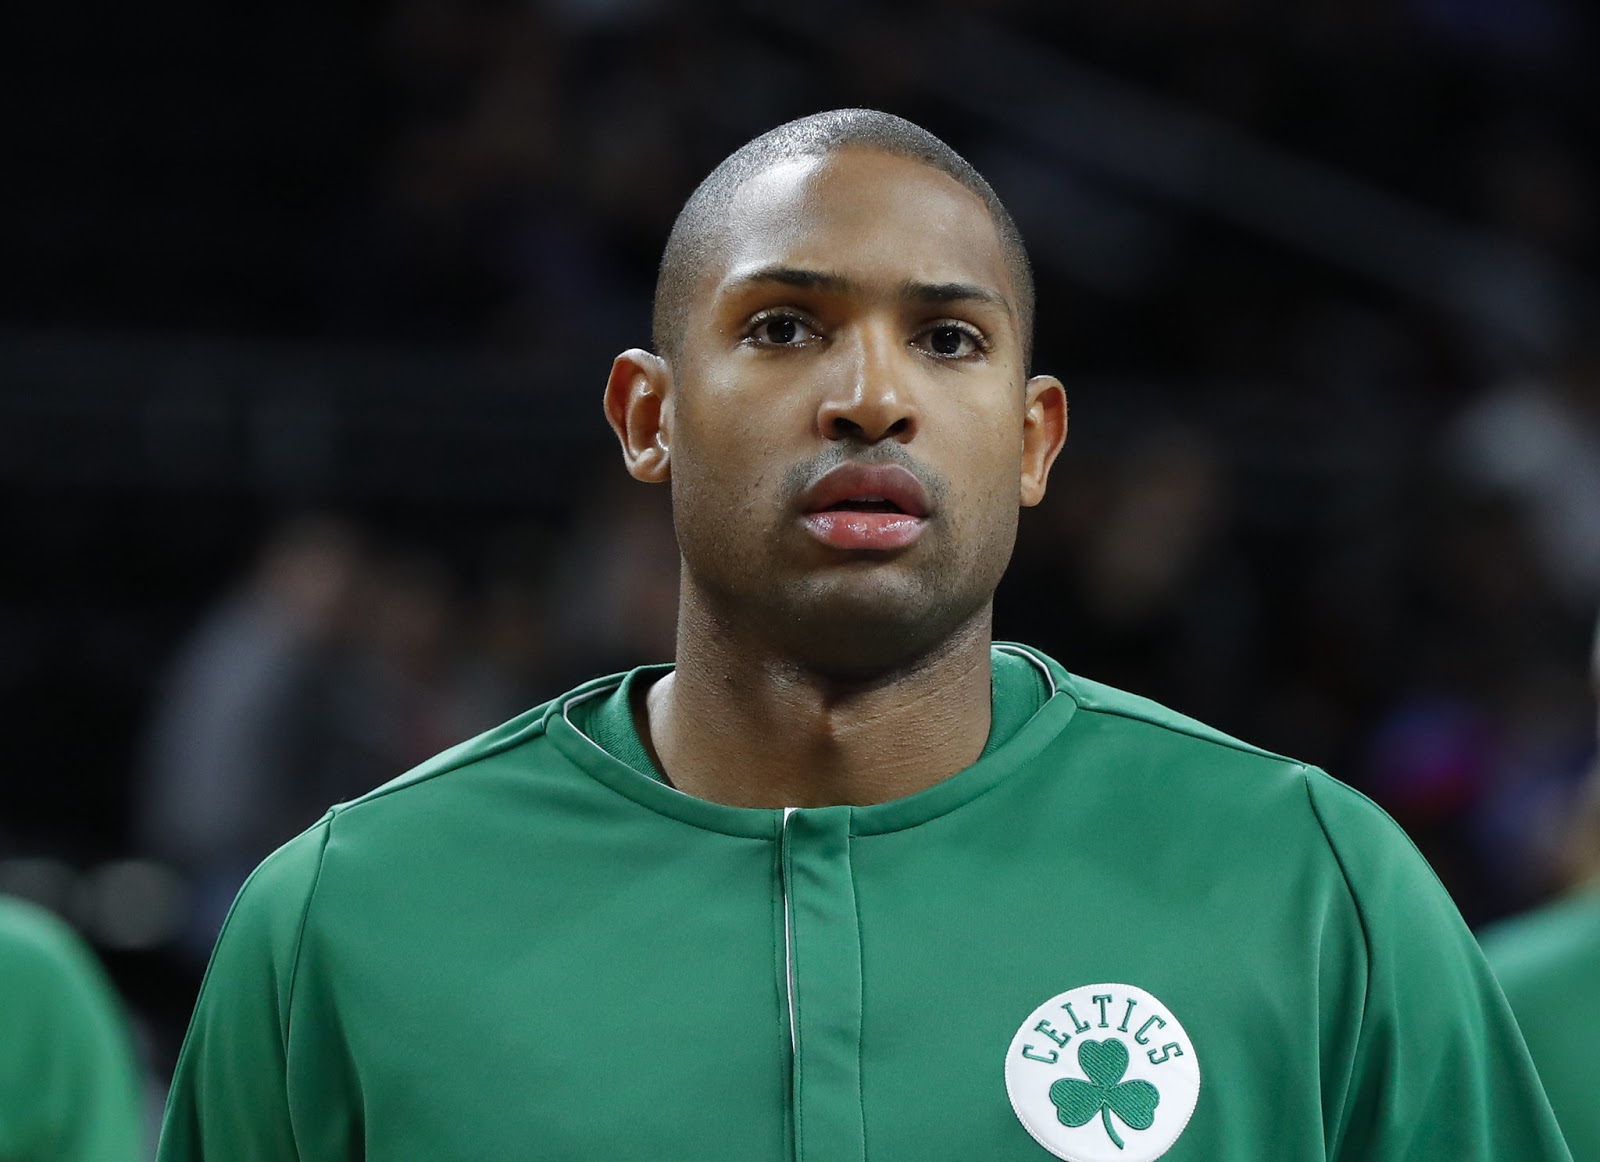 Al Horford out tonight versus the Lakers with concussion-like symptoms